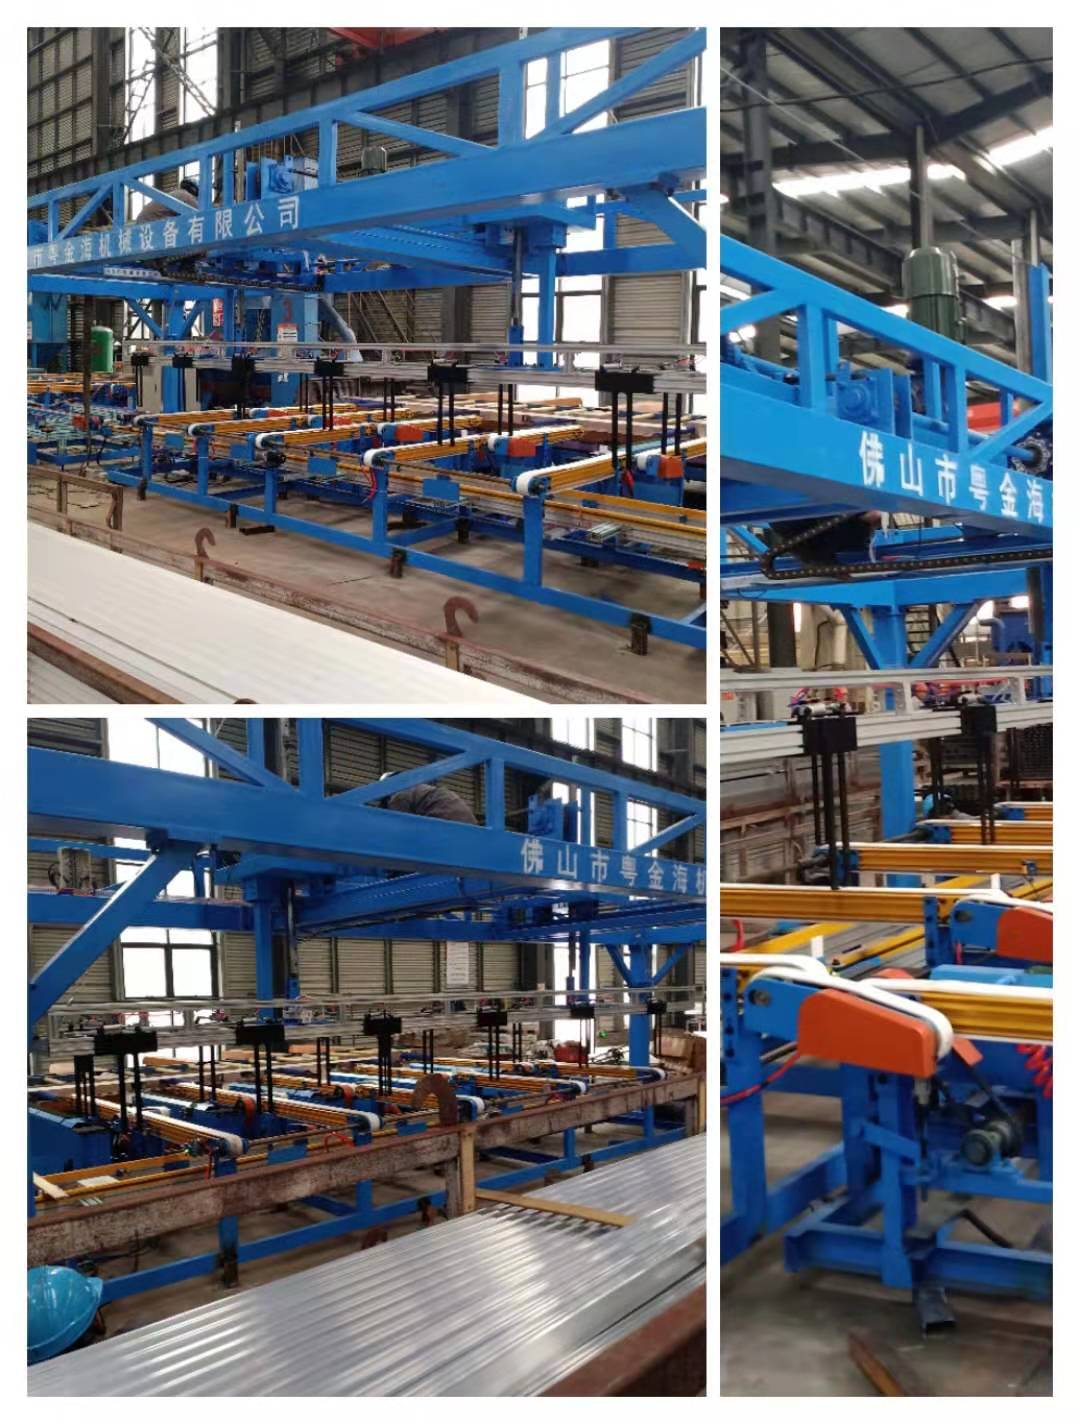 Automatic feeding and framing equipment